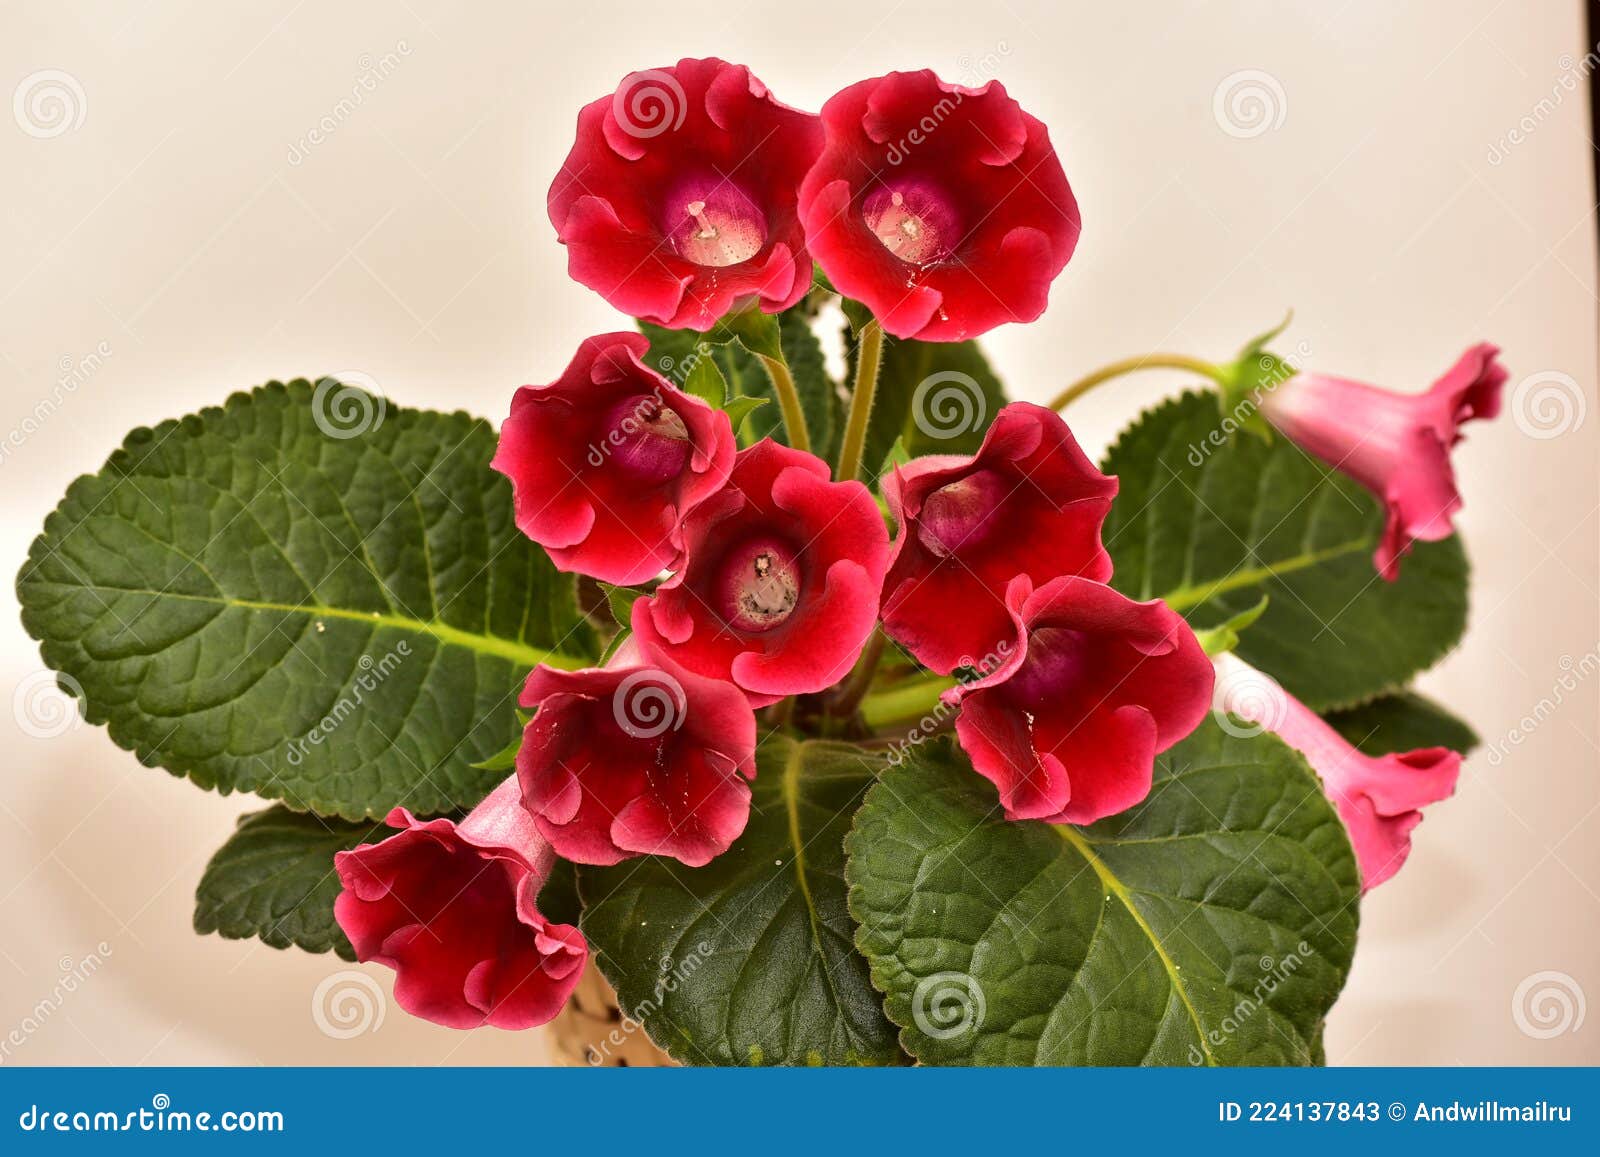 Gloxinia Plant with Red Flowers in a Flower Pot Stock Image - Image of  gloxinia, leaves: 224137843